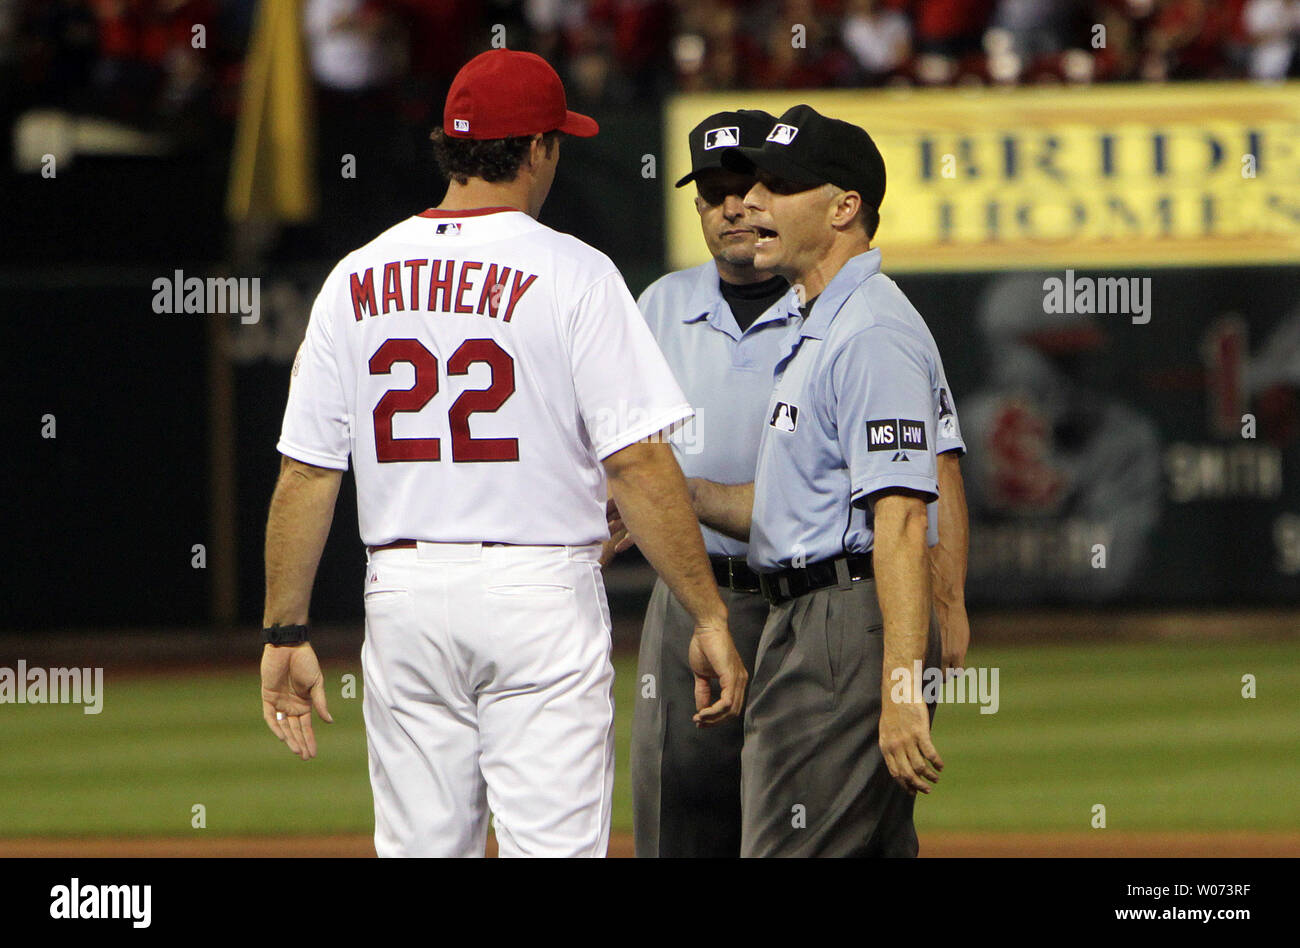 St. Louis Cardinals manager Mike Matheny talks with umpires Dan Iassogna (R) and Dale Scott after they called Carlos Beltran's hit a double in the third inning against the Pittsburgh Pirates at Busch Stadium in St. Louis on May 2, 2012. The play was reviewed and changed to a three run home run.   UPI/Bill Greenblatt Stock Photo